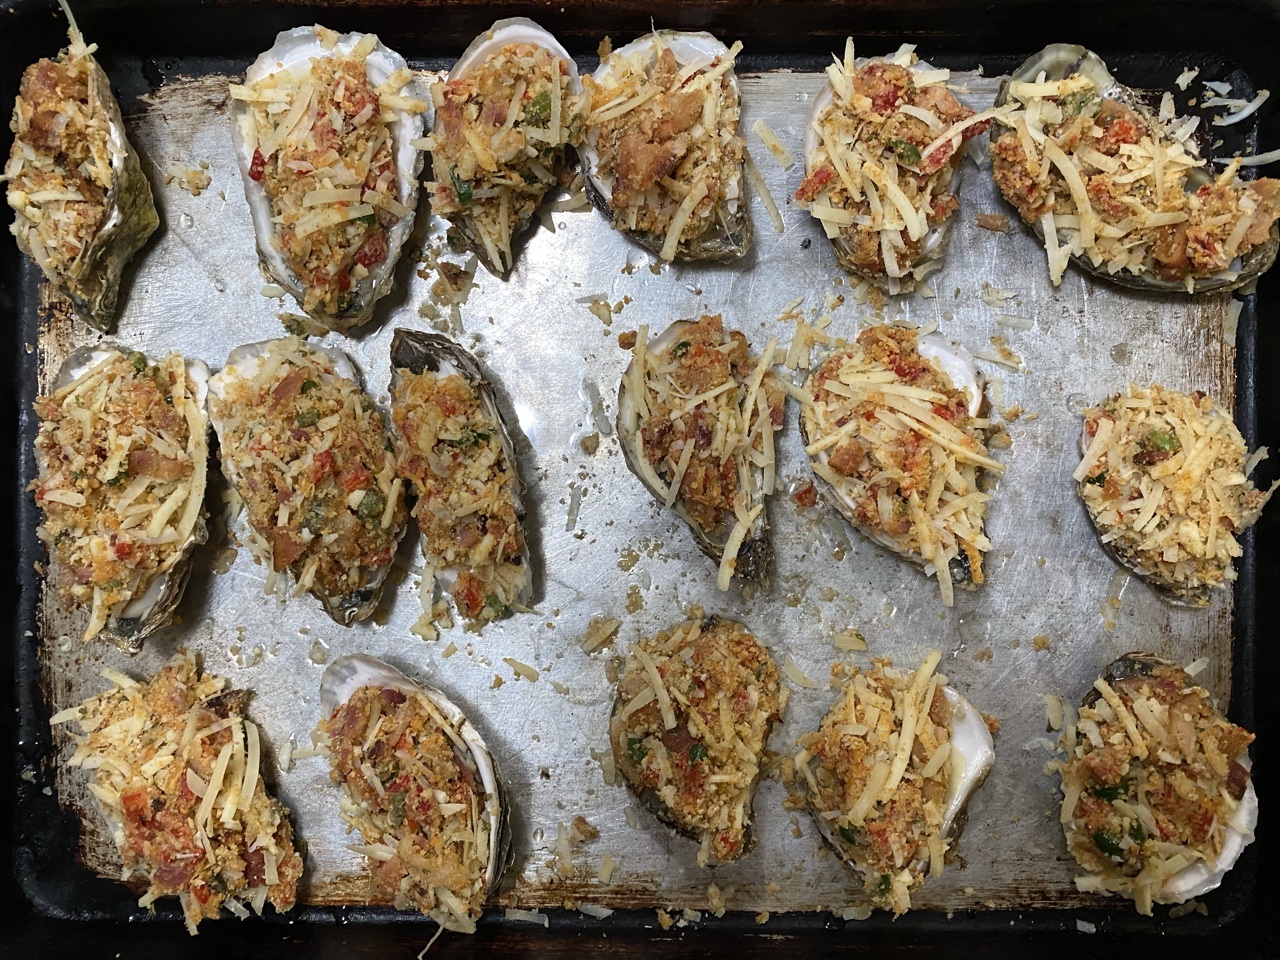 01CD1A39 8EB6 4F64 AC4D 788C71AA95F8 - Sorry Charlie’s Copycat Casino Baked Oysters with Savory Macaroni & Cheese